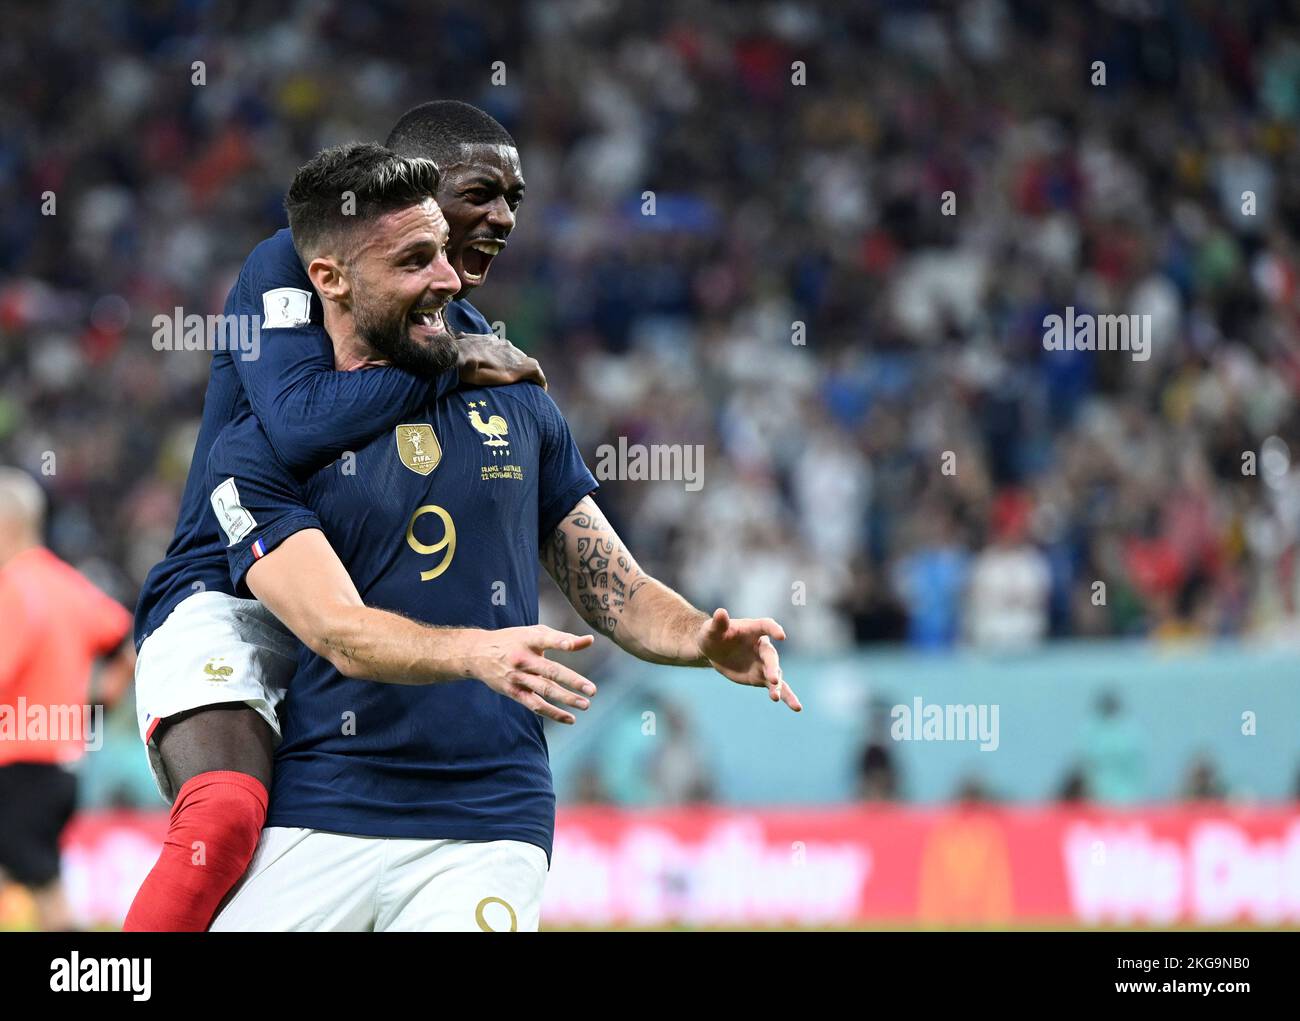 Al Wakrah, Qatar. 22nd Nov, 2022. Olivier Giroud (R) of France celebrates his goal with teammate Ousmane Dembele during the Group D match between France and Australia of the 2022 FIFA World Cup at Al Janoub Stadium in Al Wakrah, Qatar, Nov. 22, 2022. Credit: Xiao Yijiu/Xinhua/Alamy Live News Stock Photo